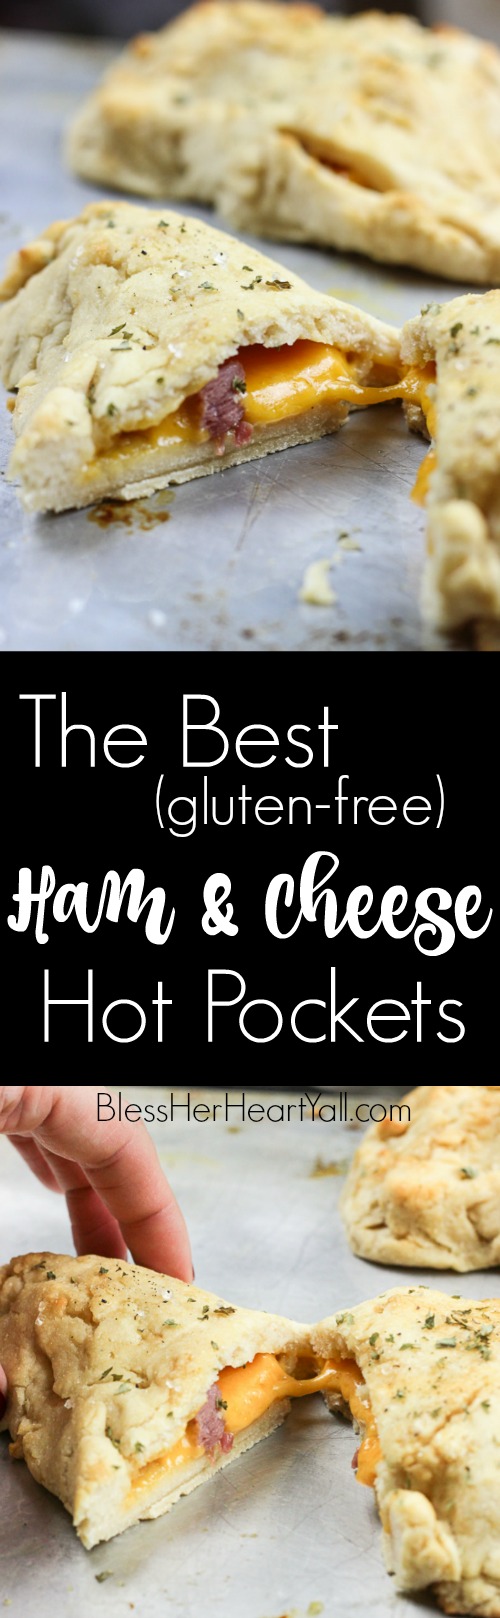 These gluten-free ham and cheese hot pockets (or calzones, or hand pies) are so easy and tasty!  Perfectly crispy pockets of smooth soft dough are stuffed with leftover Christmas ham leftovers and melty cheese, closed up, and brushed with an olive oil, honey, brown sugar, and garlic sauce.  It's the perfect tasty meal on-the-go and a great way to finish off those Christmas ham leftovers! www.blessherheartyall.com